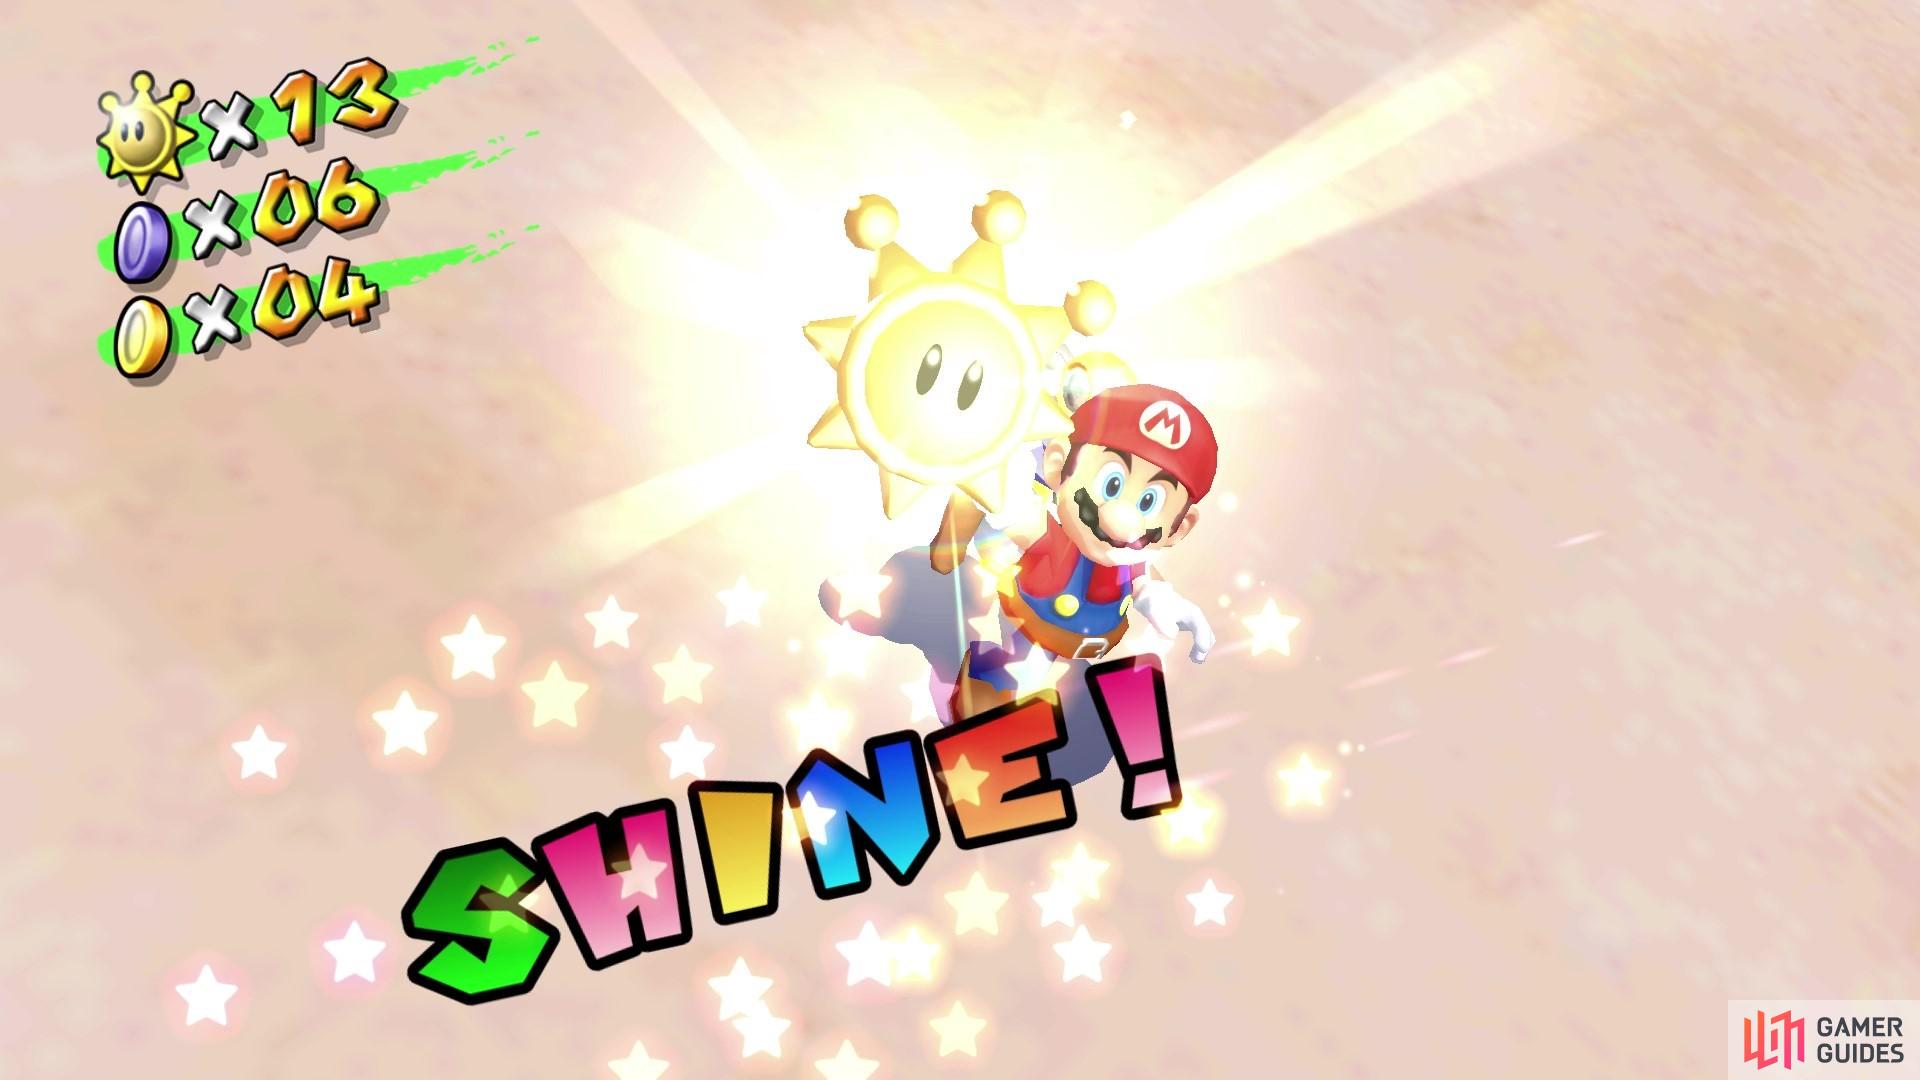 When you’ve gotten rid of all 6 of the plungelos, you’ll be able to grab a Shine from the beach!